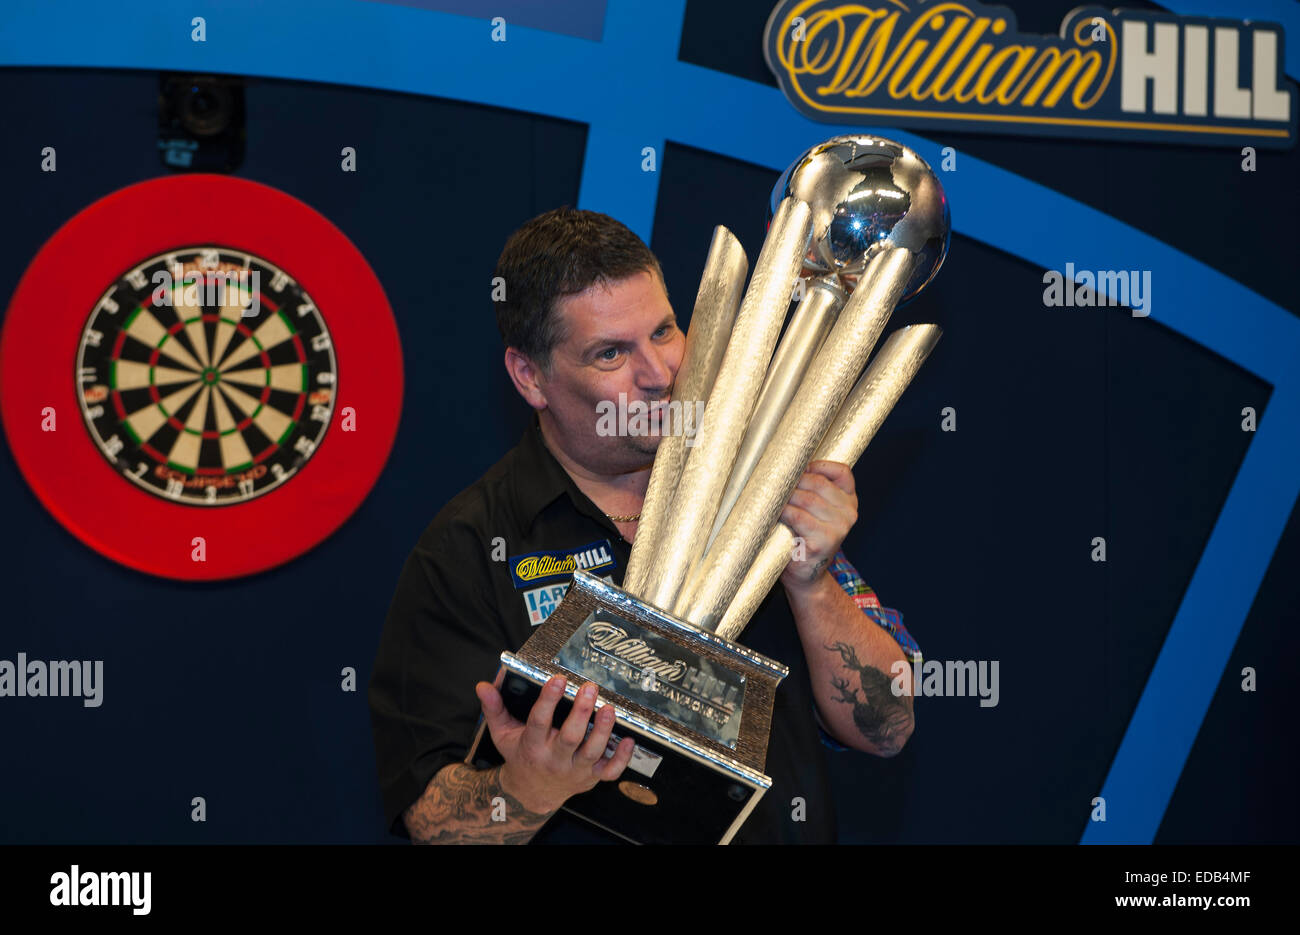 London, UK. 04th Jan, 2015. William Hill PDC World Darts Championship.  Finals Night. Gary Anderson (4) [SCO] lifts the Sid Waddell Trophy after  beating Phil Taylor (2) [ENG] 7-6 in the final.